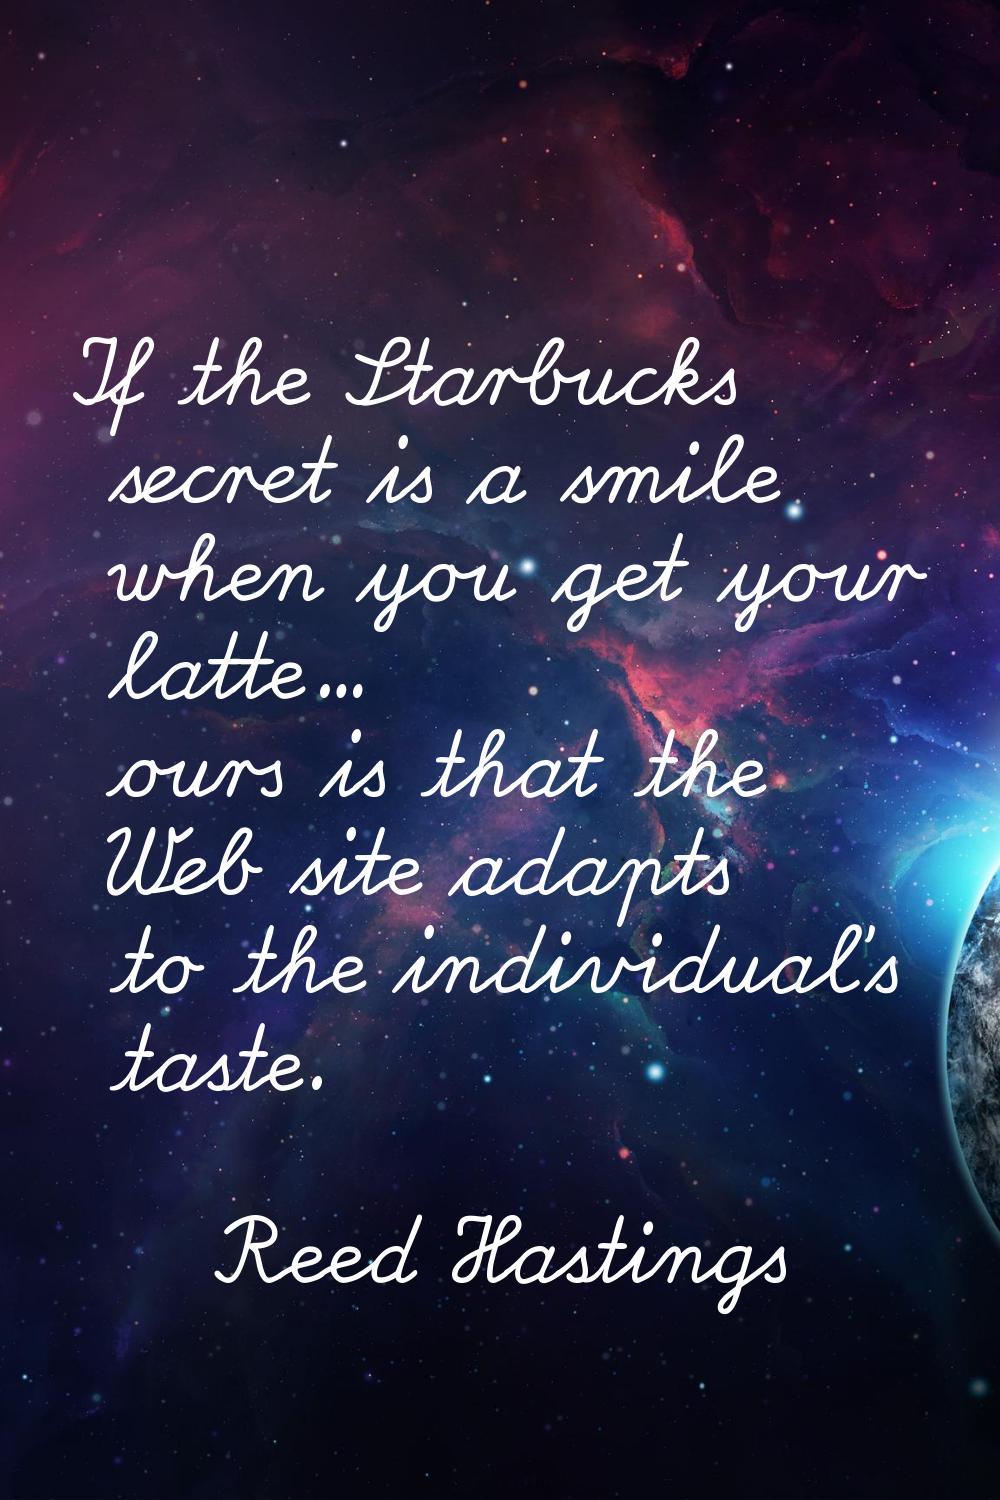 If the Starbucks secret is a smile when you get your latte... ours is that the Web site adapts to t